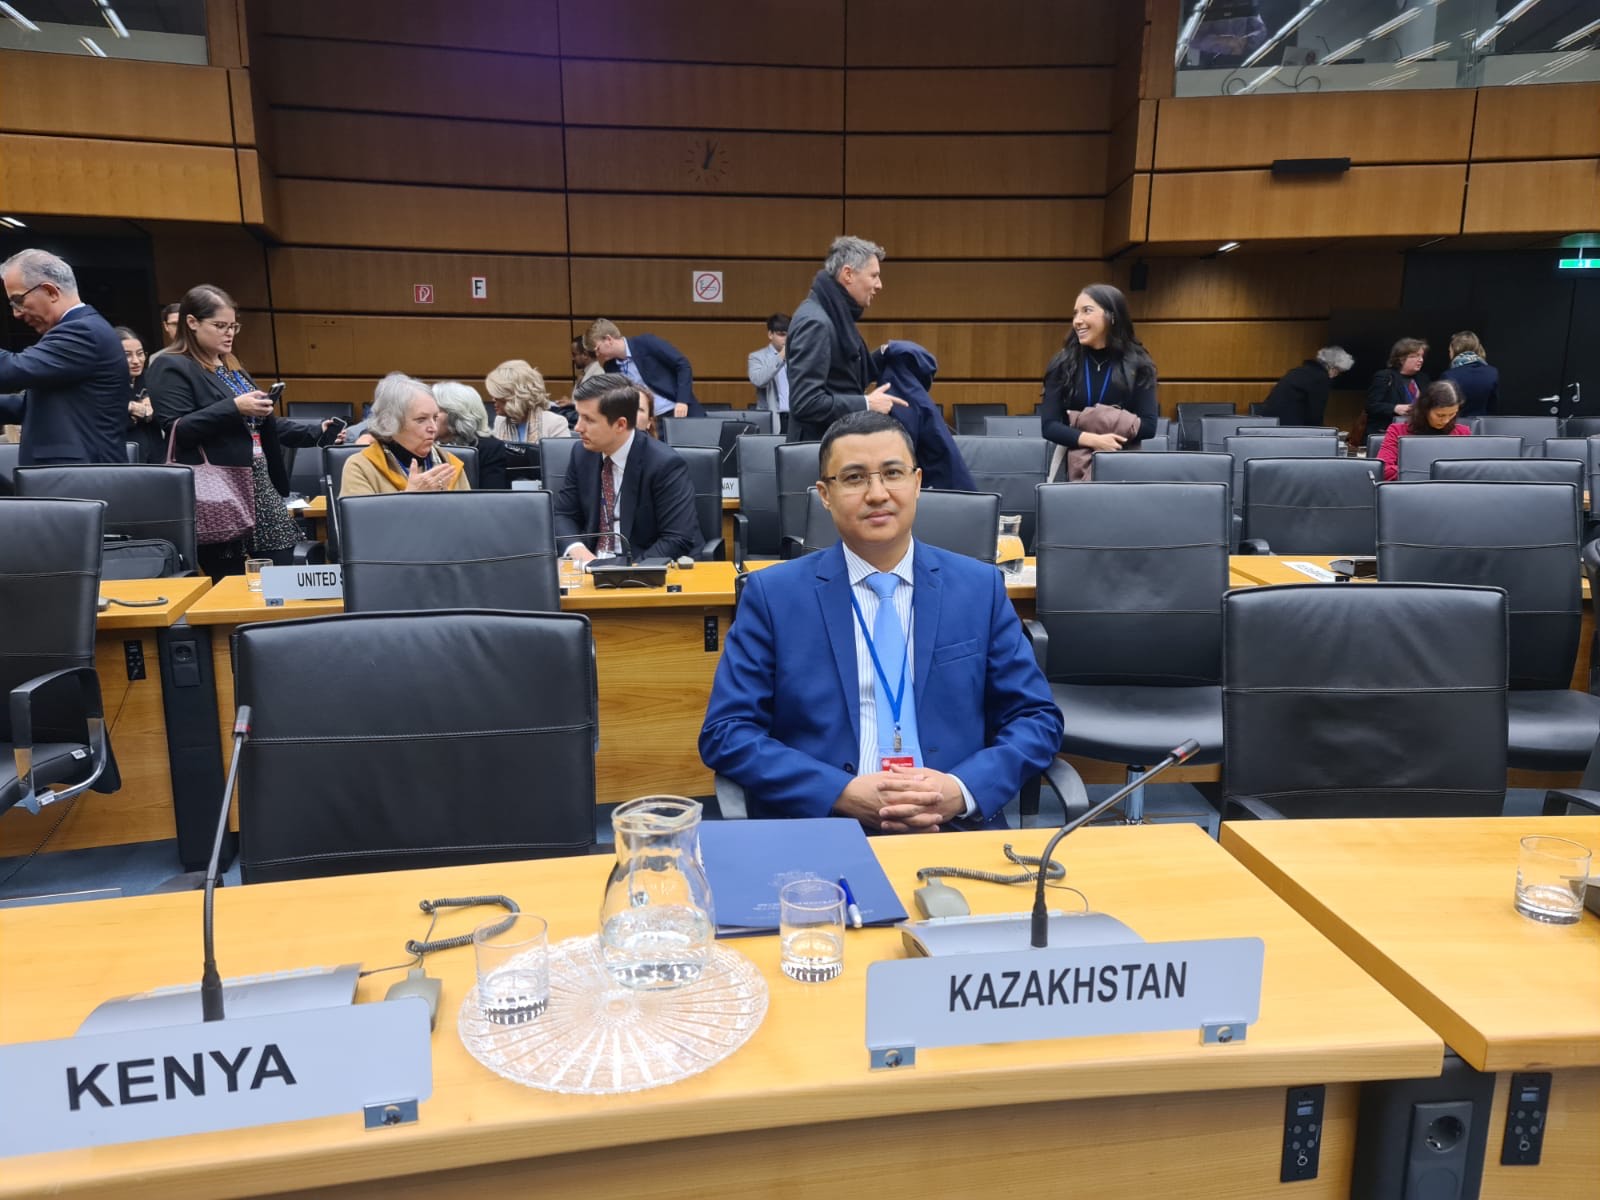 The delegation of Kazakhstan participated in the work of the Commissions on Drugs and Crime in Vienna